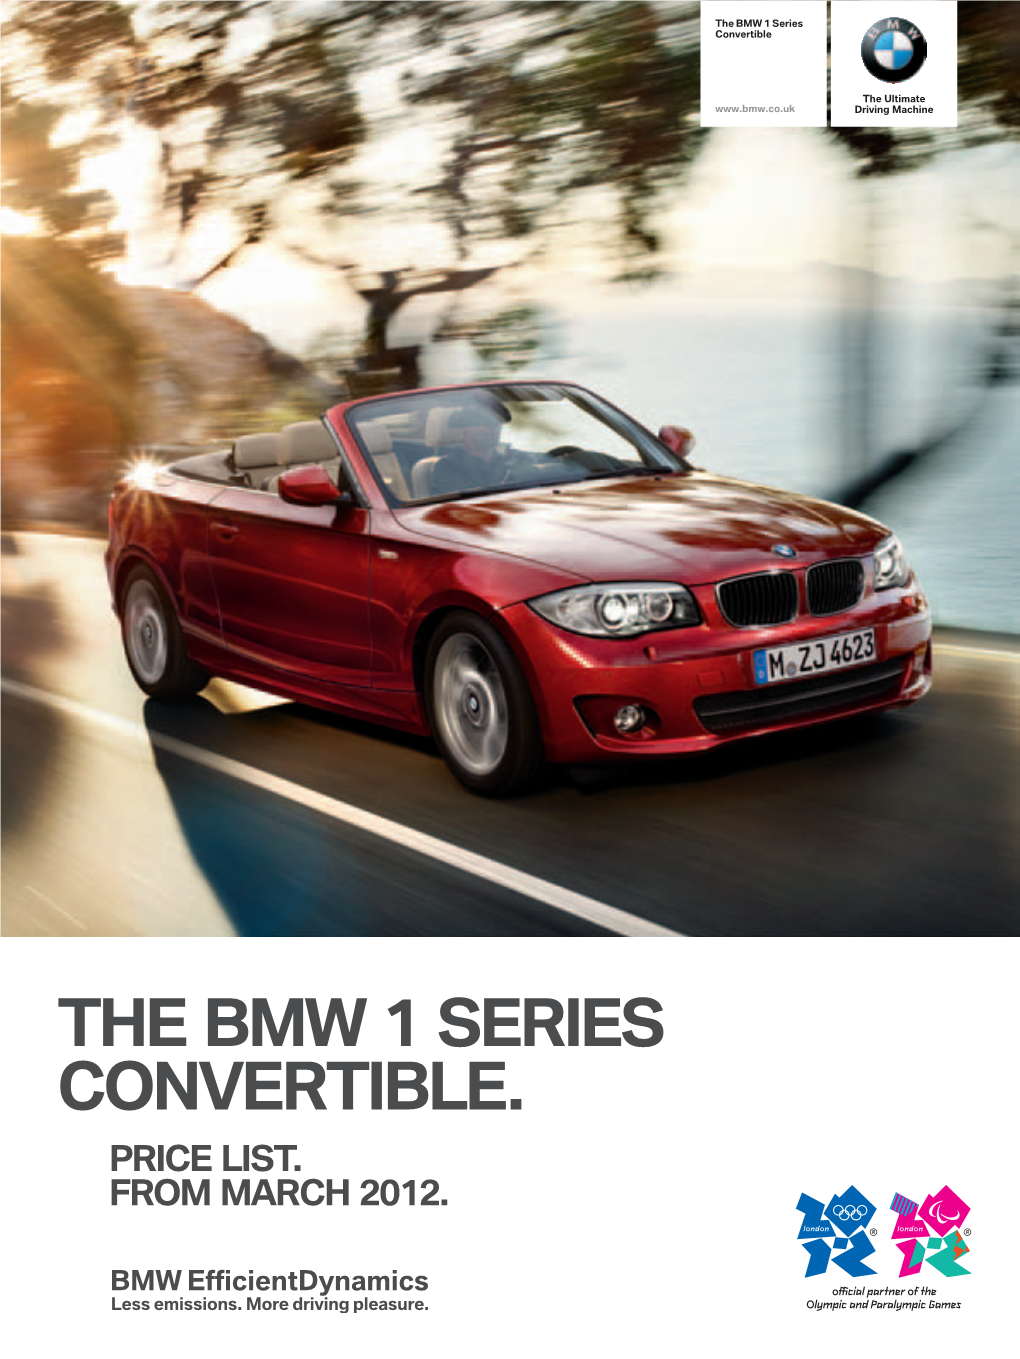 THE BMW 1 Series CONVERTIBLE. Price List